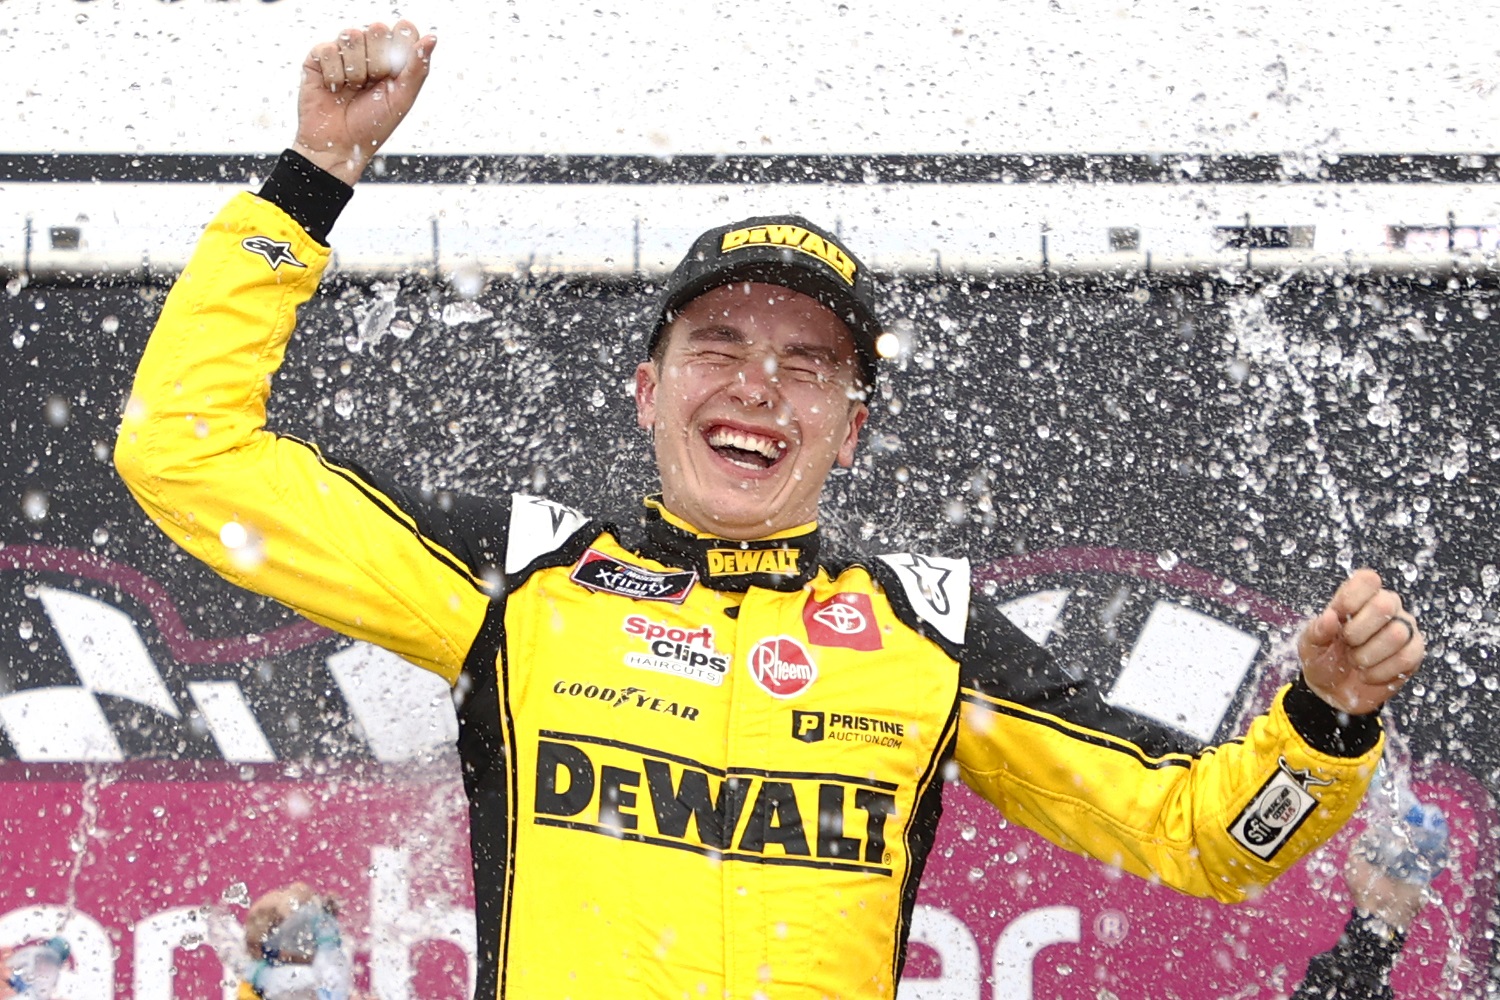 Christopher Bell celebrates in victory lane after winning the NASCAR Xfinity Series Ambetter Get Vaccinated 200 at New Hampshire Motor Speedway on July 17, 2021 in Loudon, New Hampshire.